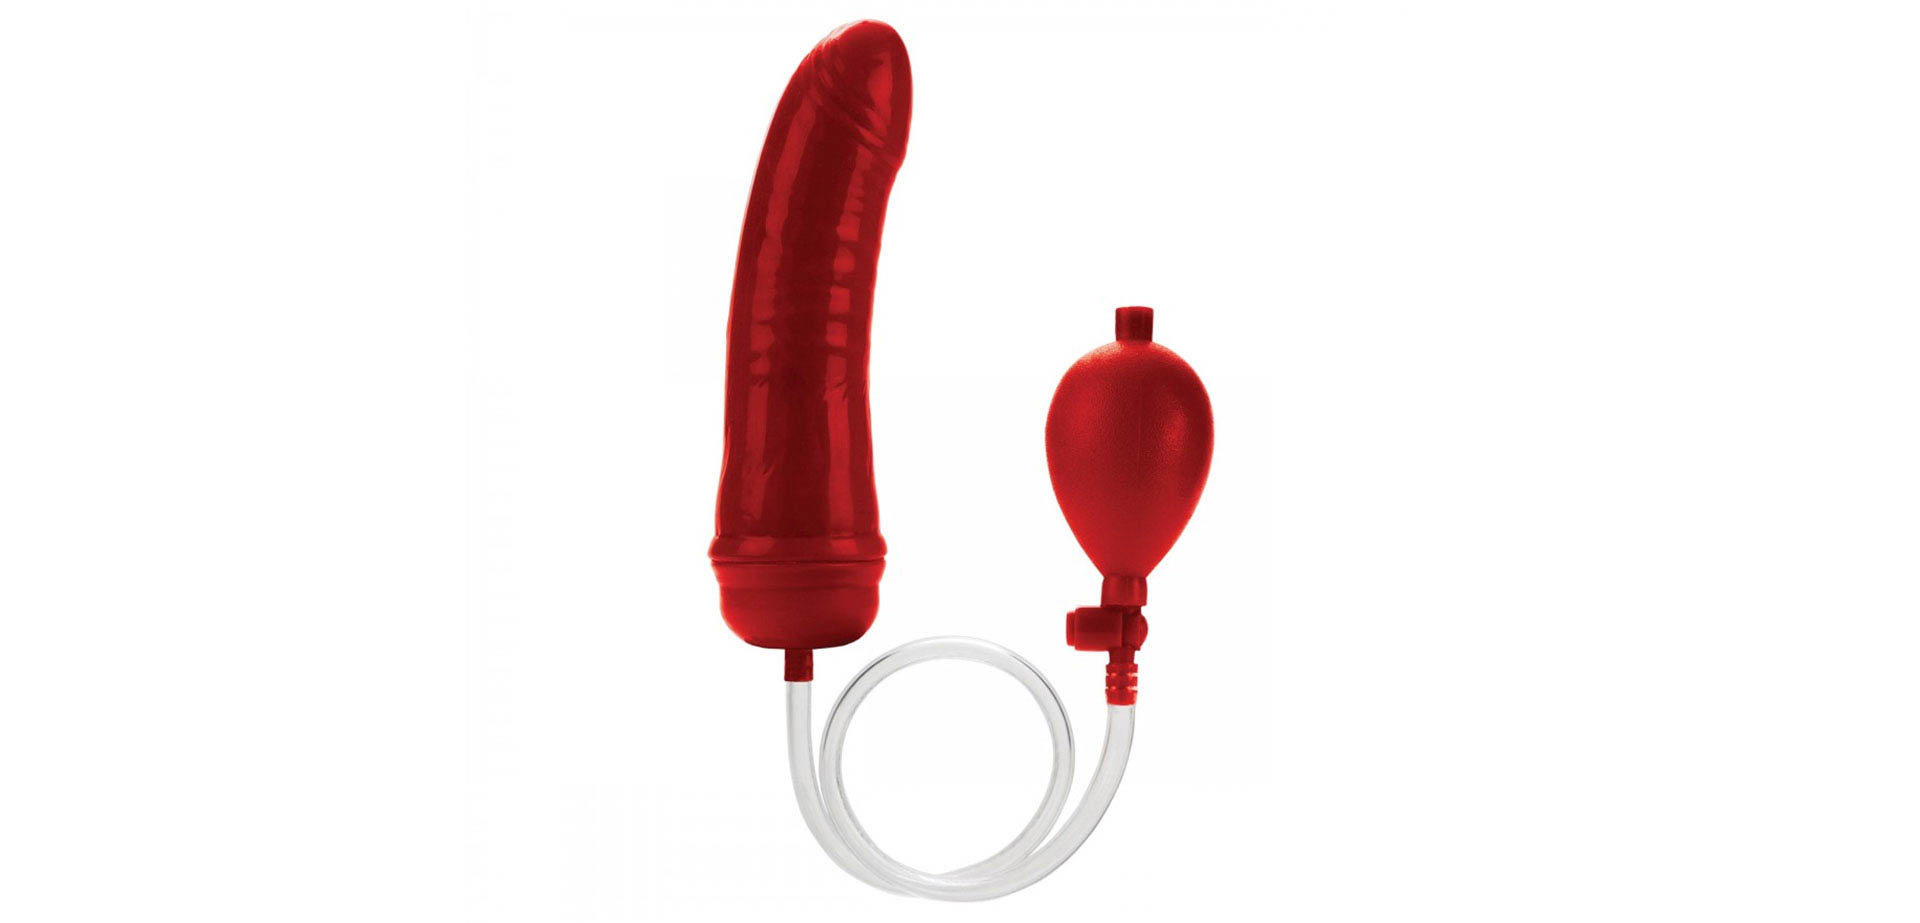 Inflatable Red Dildo Butt Plug.